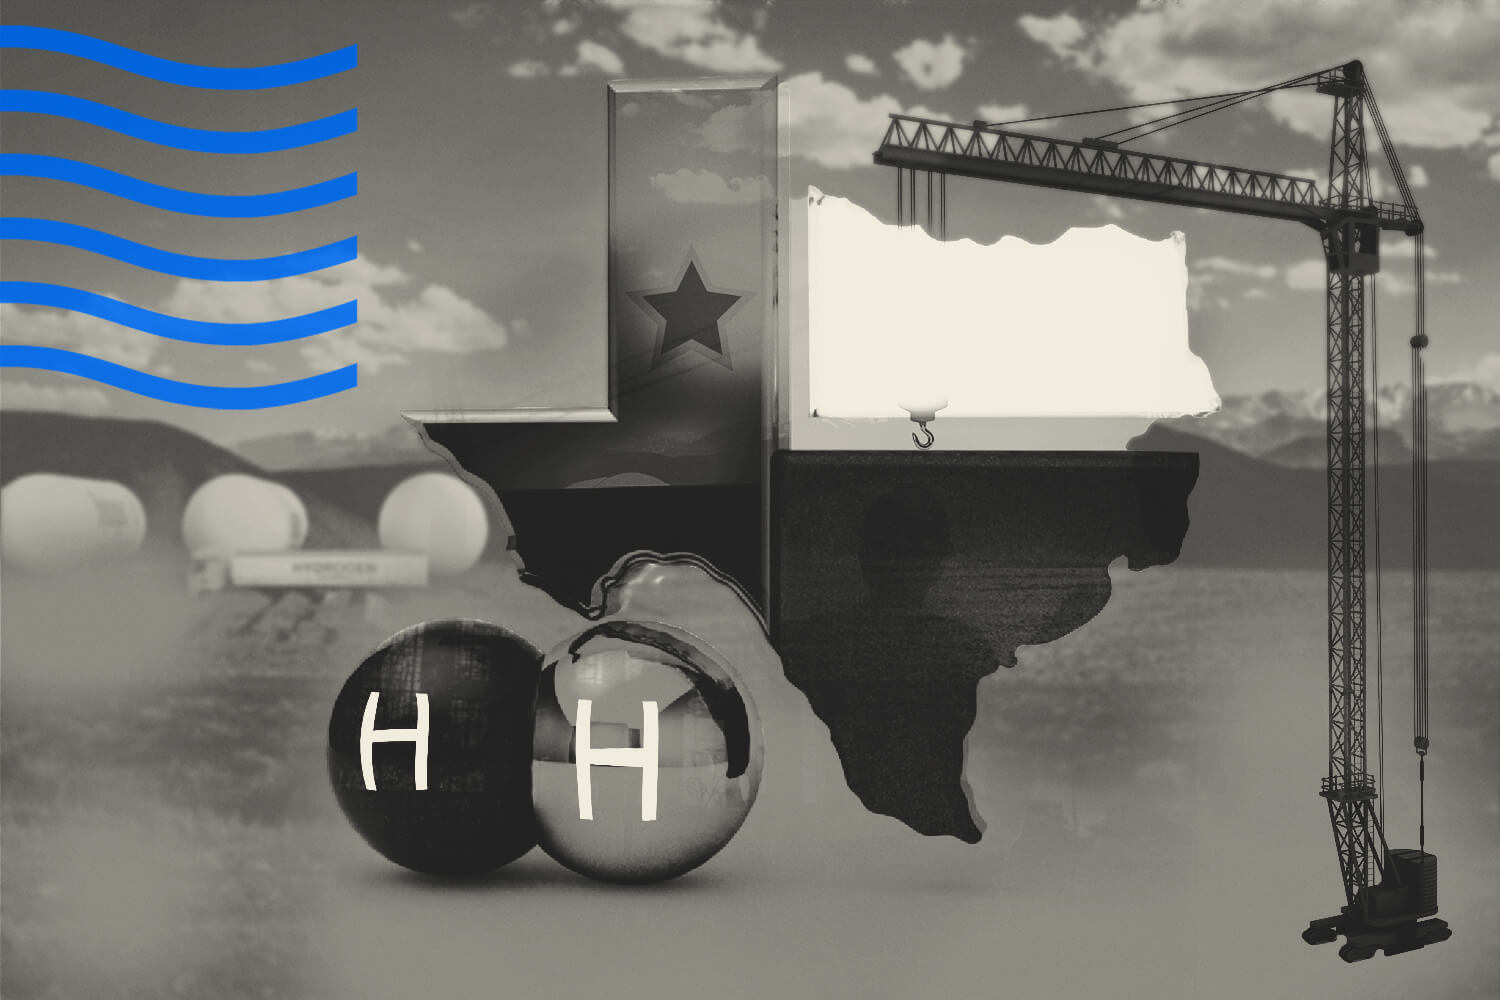 An illustration in black and white with an outline of the state of Texas and two hydrogen molecules, as well as a construction crane and hydrogen storage facilities in the background.